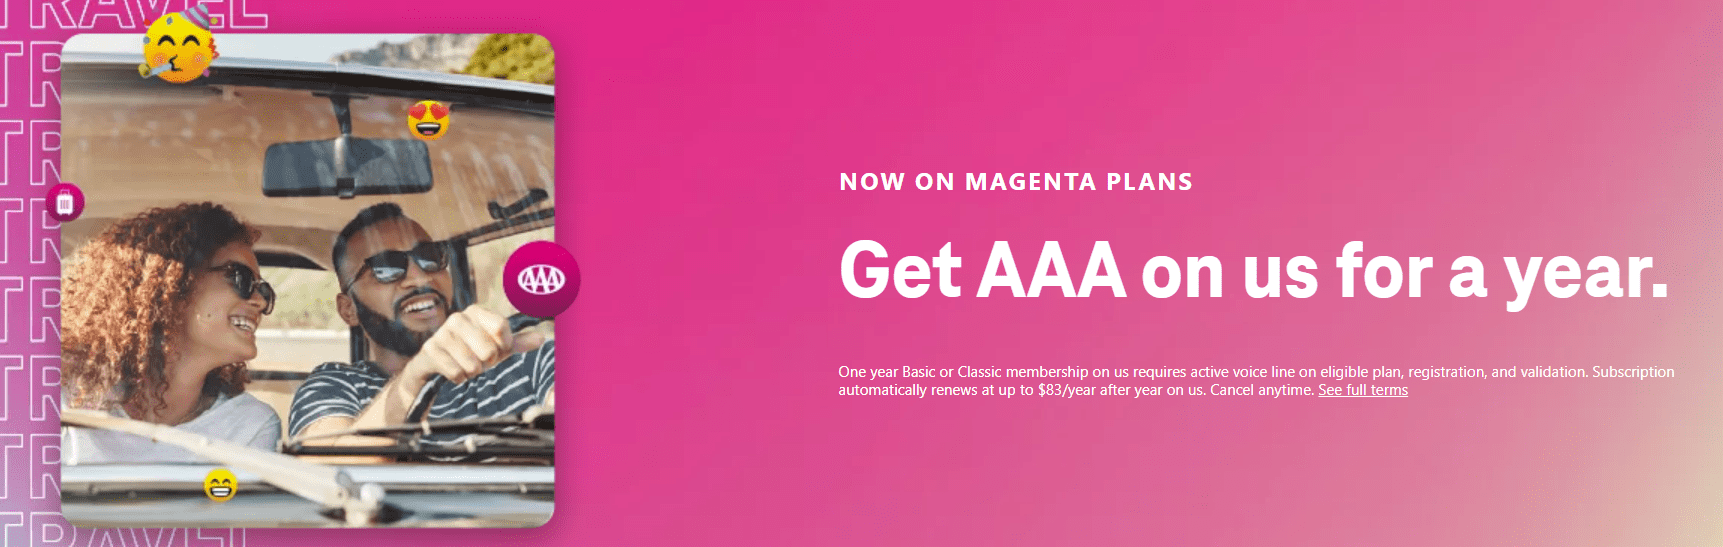 TMobile Magenta Plans Free Year Of AAA Doctor Of Credit